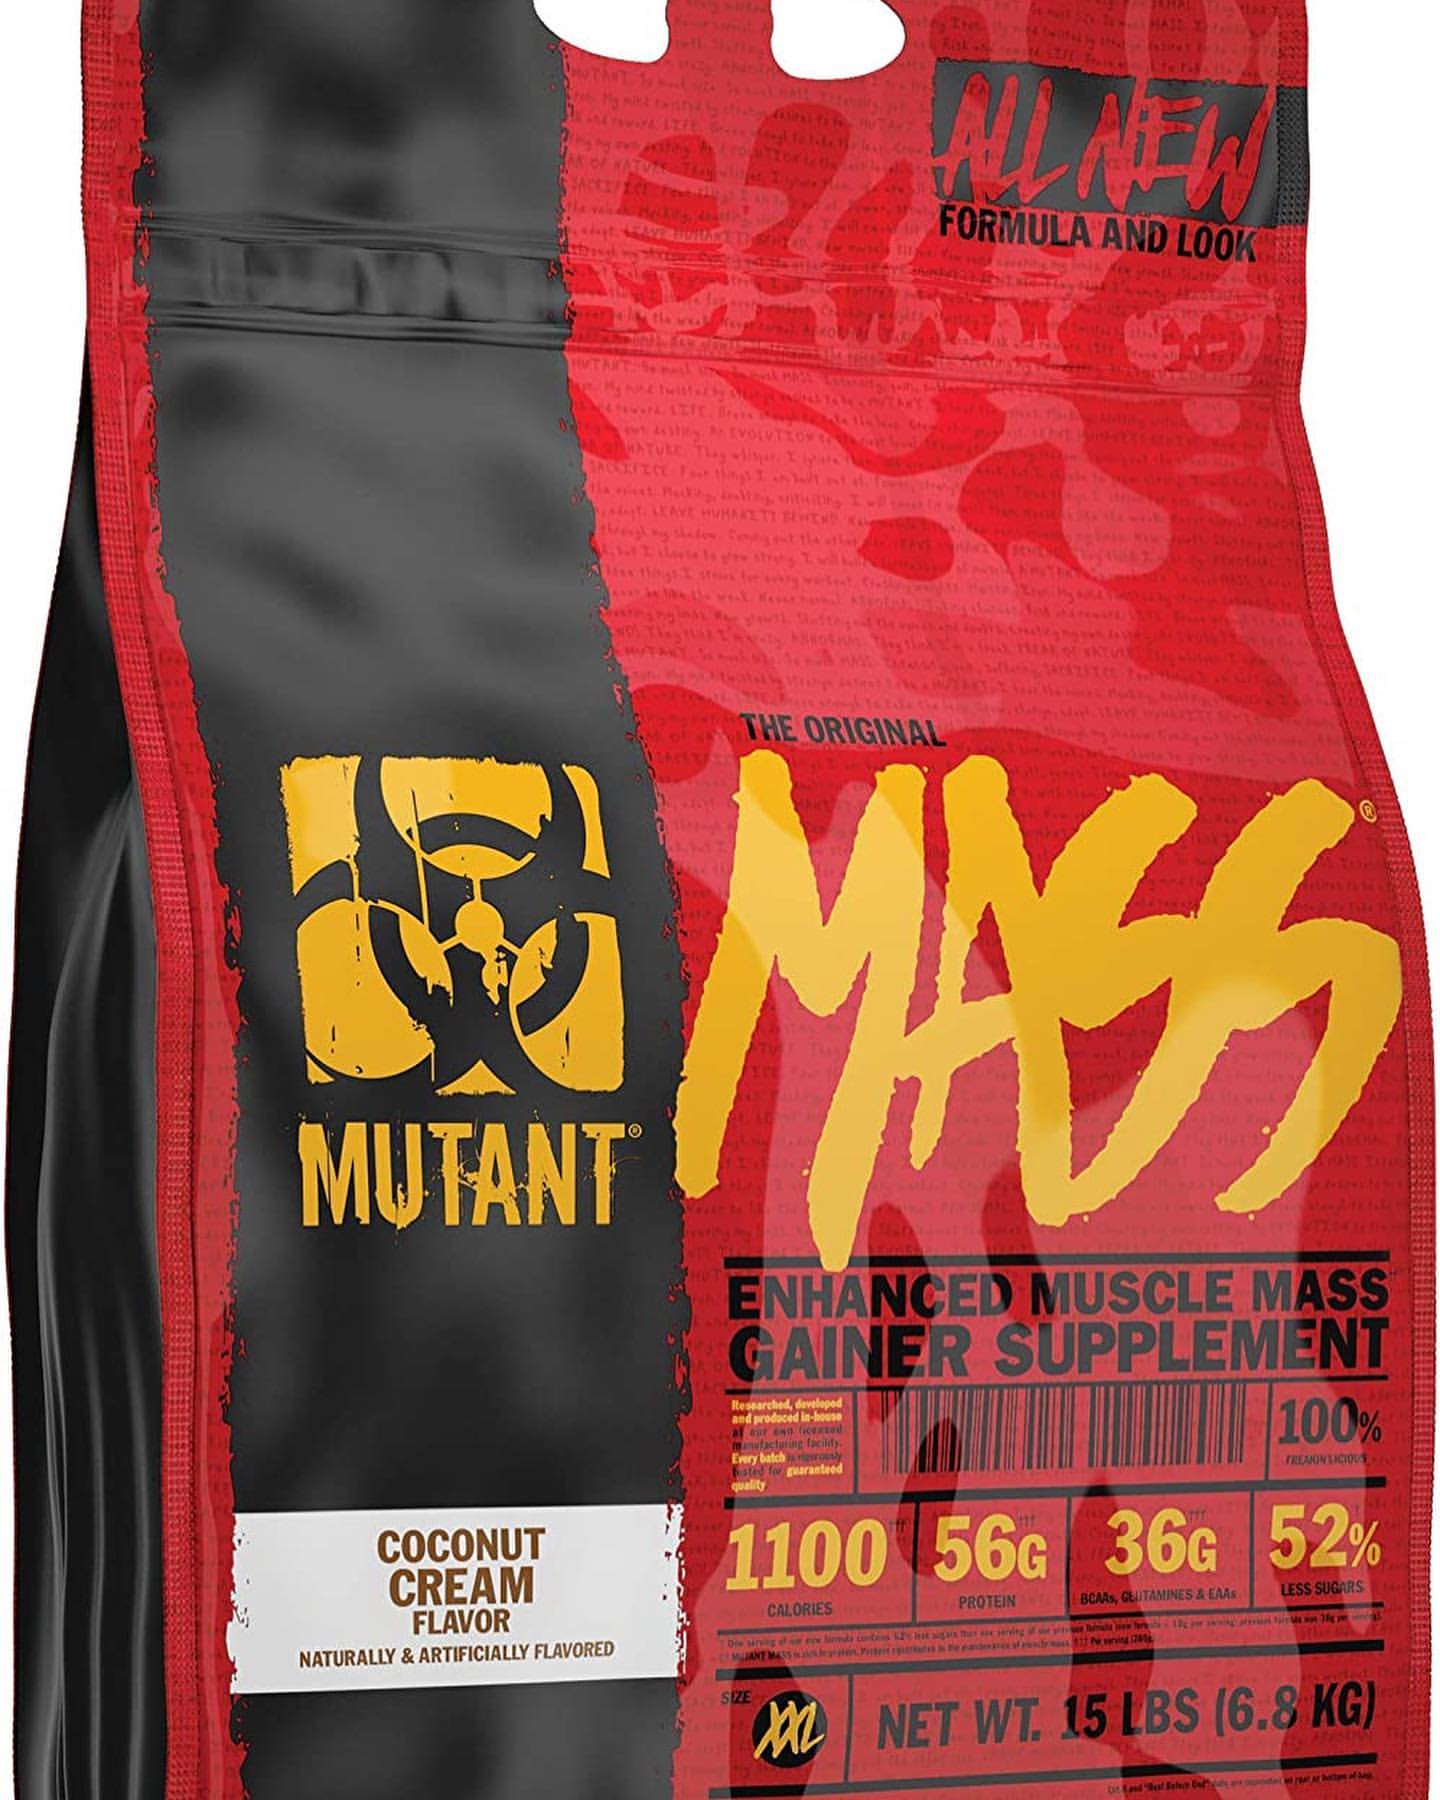 Syd Kilauea Mountain økologisk Mutant Mass Weight Gainer Protein Powder – Build Muscle Size and Strength  with 1100 Calories – 56 g Protein – 26.1 g EAAs – 12.2 g of BCAAs – 15 lbs  – Triple Chocolate – Airgym